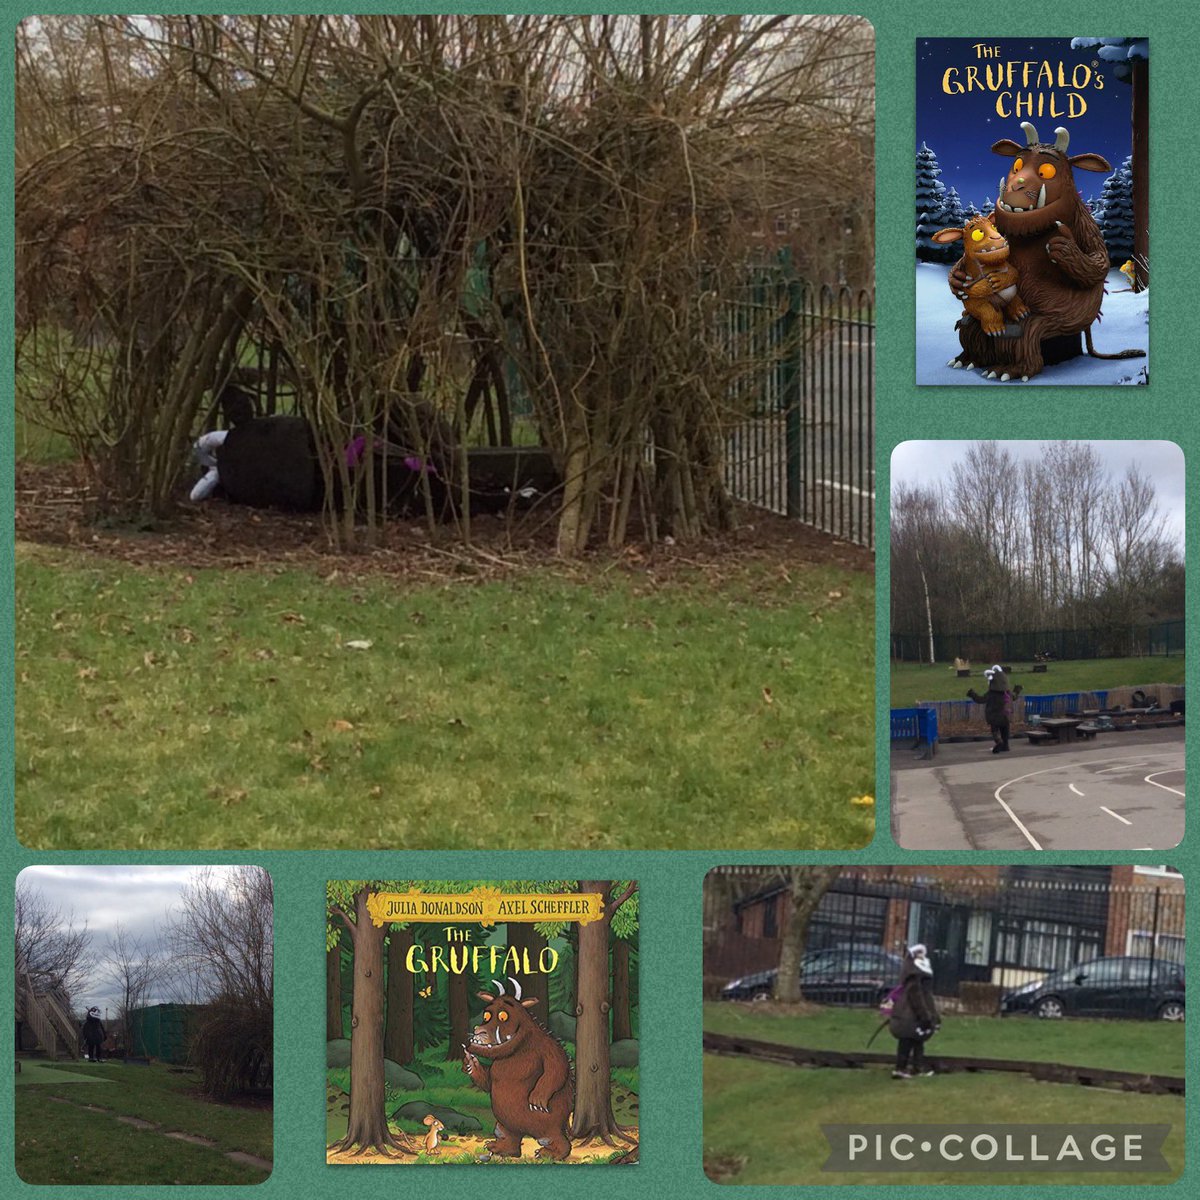 EYFS have had a very unexpected visitor today! The Gruffalo came to visit school and made an appearance on our live lessons! We even found him having a sleep outside! @StJosephStBede #SJSBEYFS  #SJSBReading #SJSBEnglish #TheGruffalo